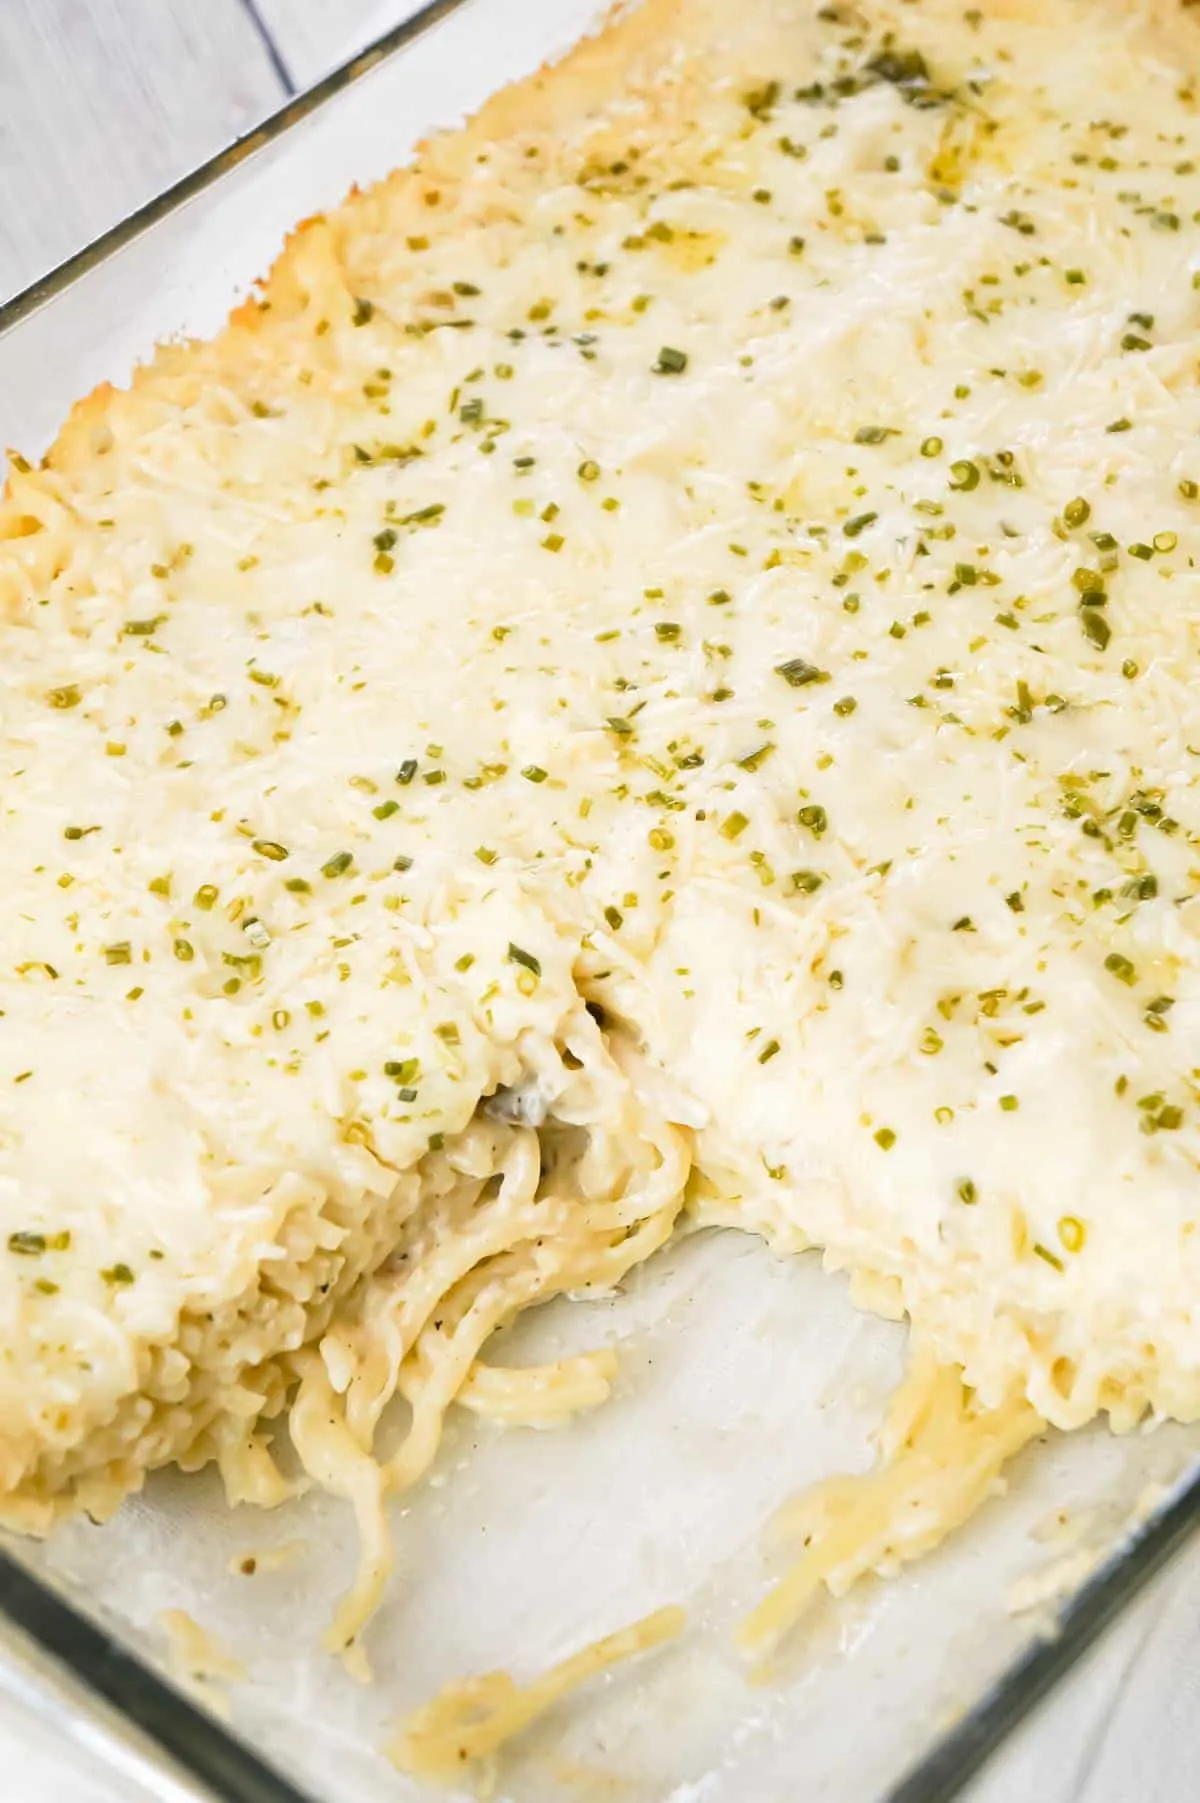 Chicken Tetrazzini is a creamy baked pasta dish loaded with shredded chicken, Parmesan and Mozzarella cheese.